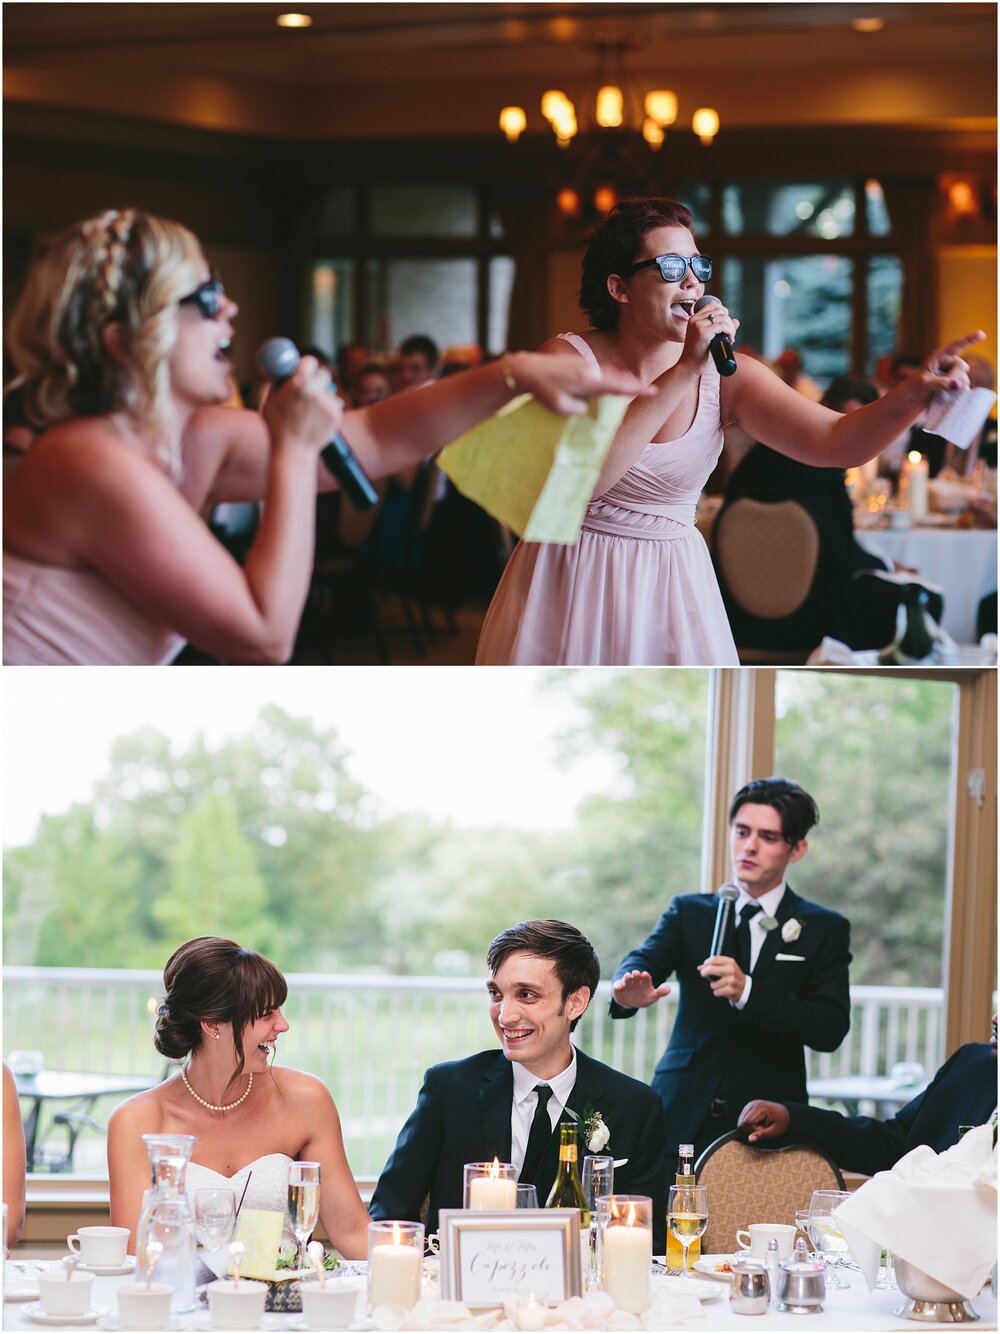 OUR_5TH_ANNIVERSARY_BROOKE_TOBIN_PHOTOGRAPHY_PHOTOS_BY_DANAANNPHOTOGRAPHY_047.jpg